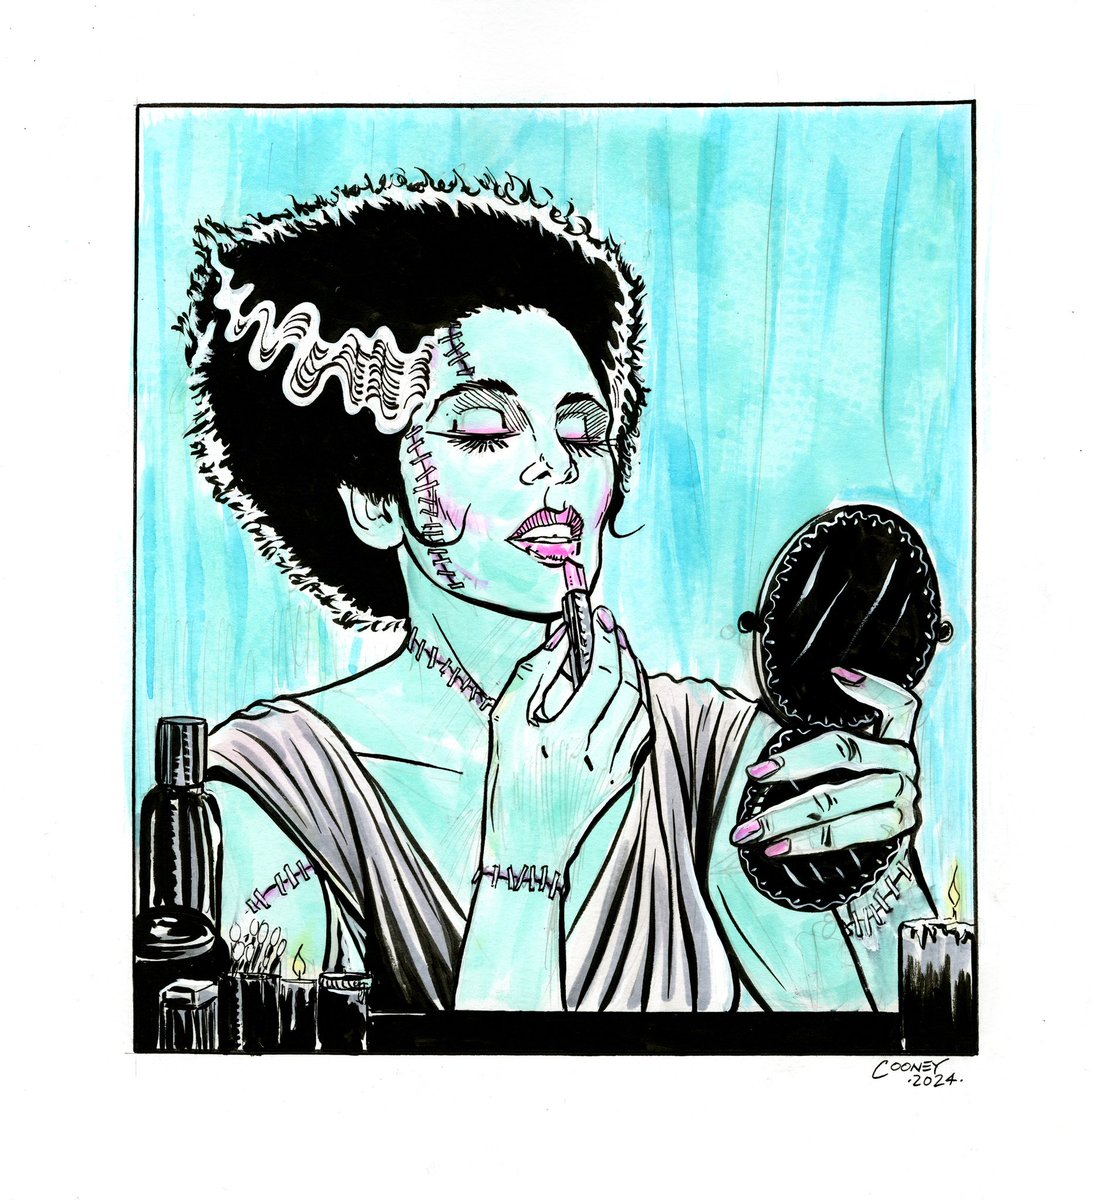 The Bride of Frankenstein -mix media on 500 series vellum Bristol @strathmoreart paper. First art post of 2024. It's been a minute. 🖤⚡️
#2024 #commission #brideoffrankenstein #maryshelley #penandink #watercolor #horror #macabre